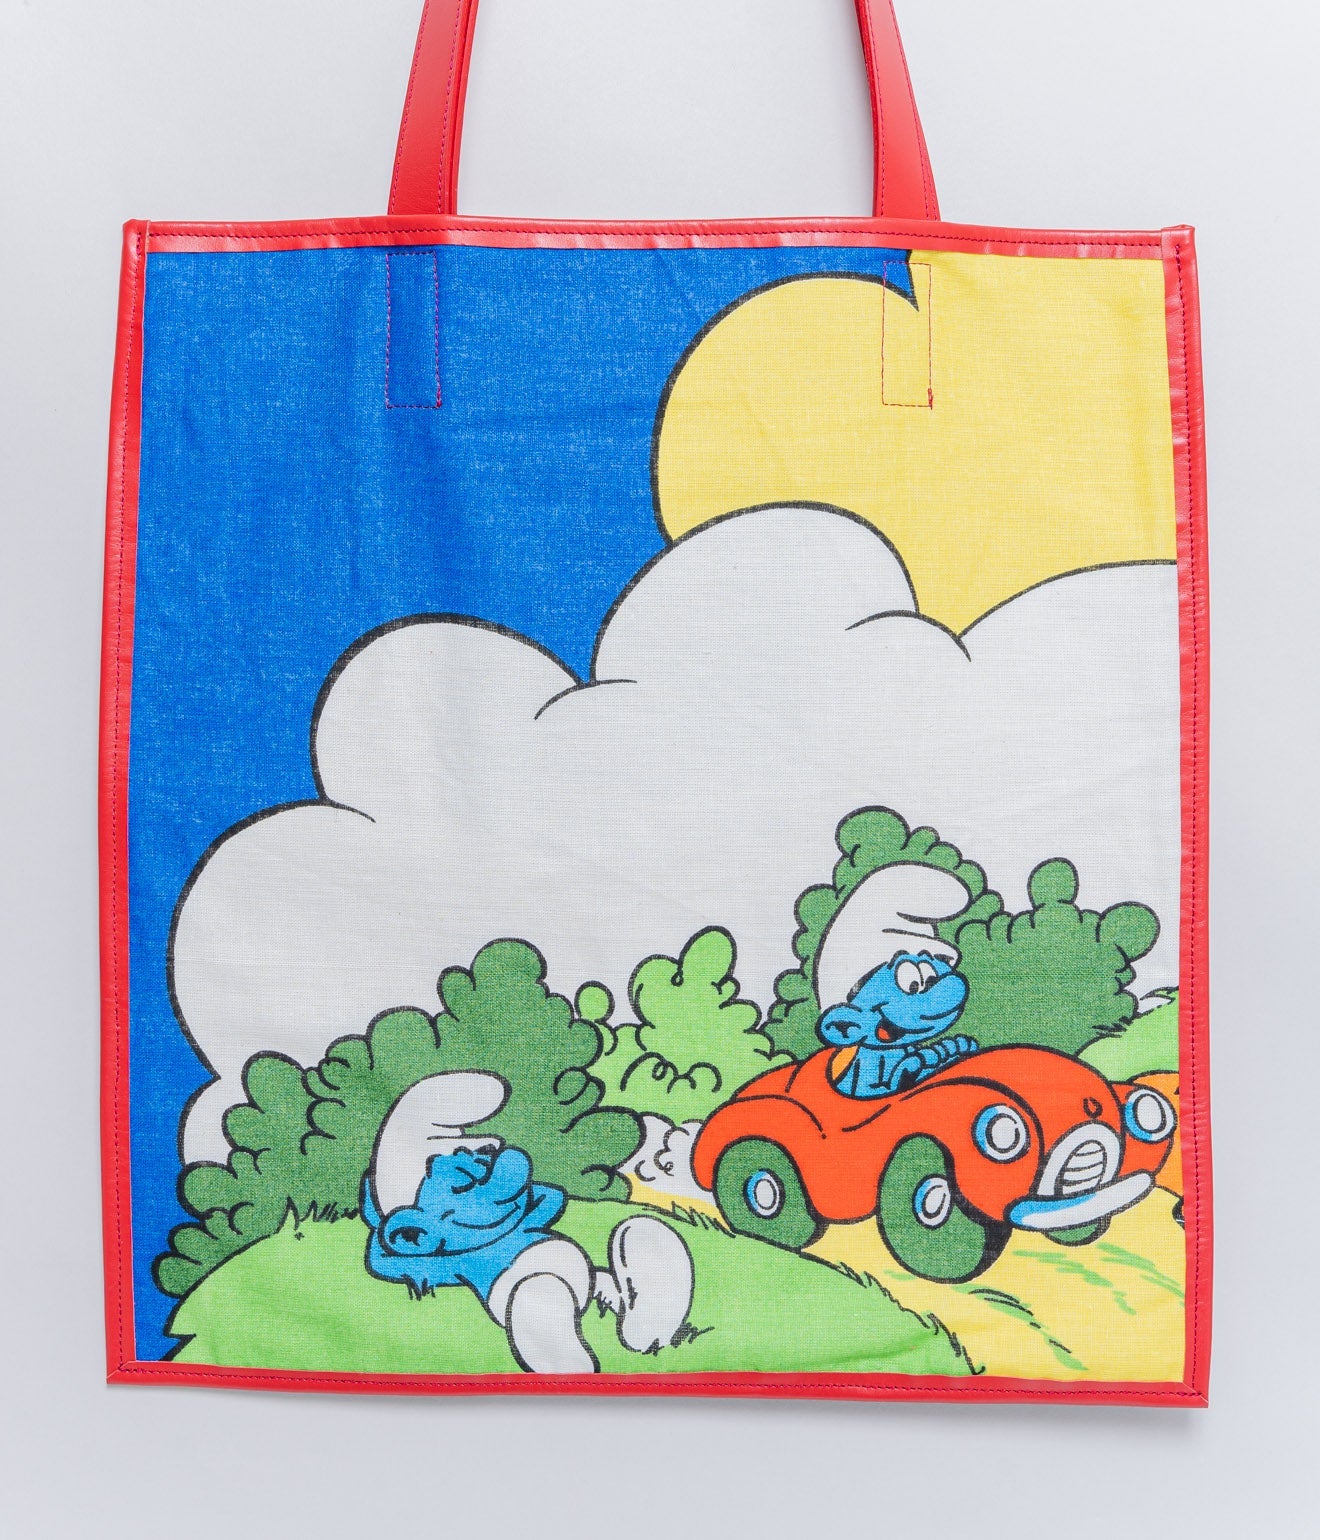 WEAREALLANIMALS UPCYCLE ”Piping Flat Tote -Vintage Smurf Fabric-" #12 - WEAREALLANIMALS